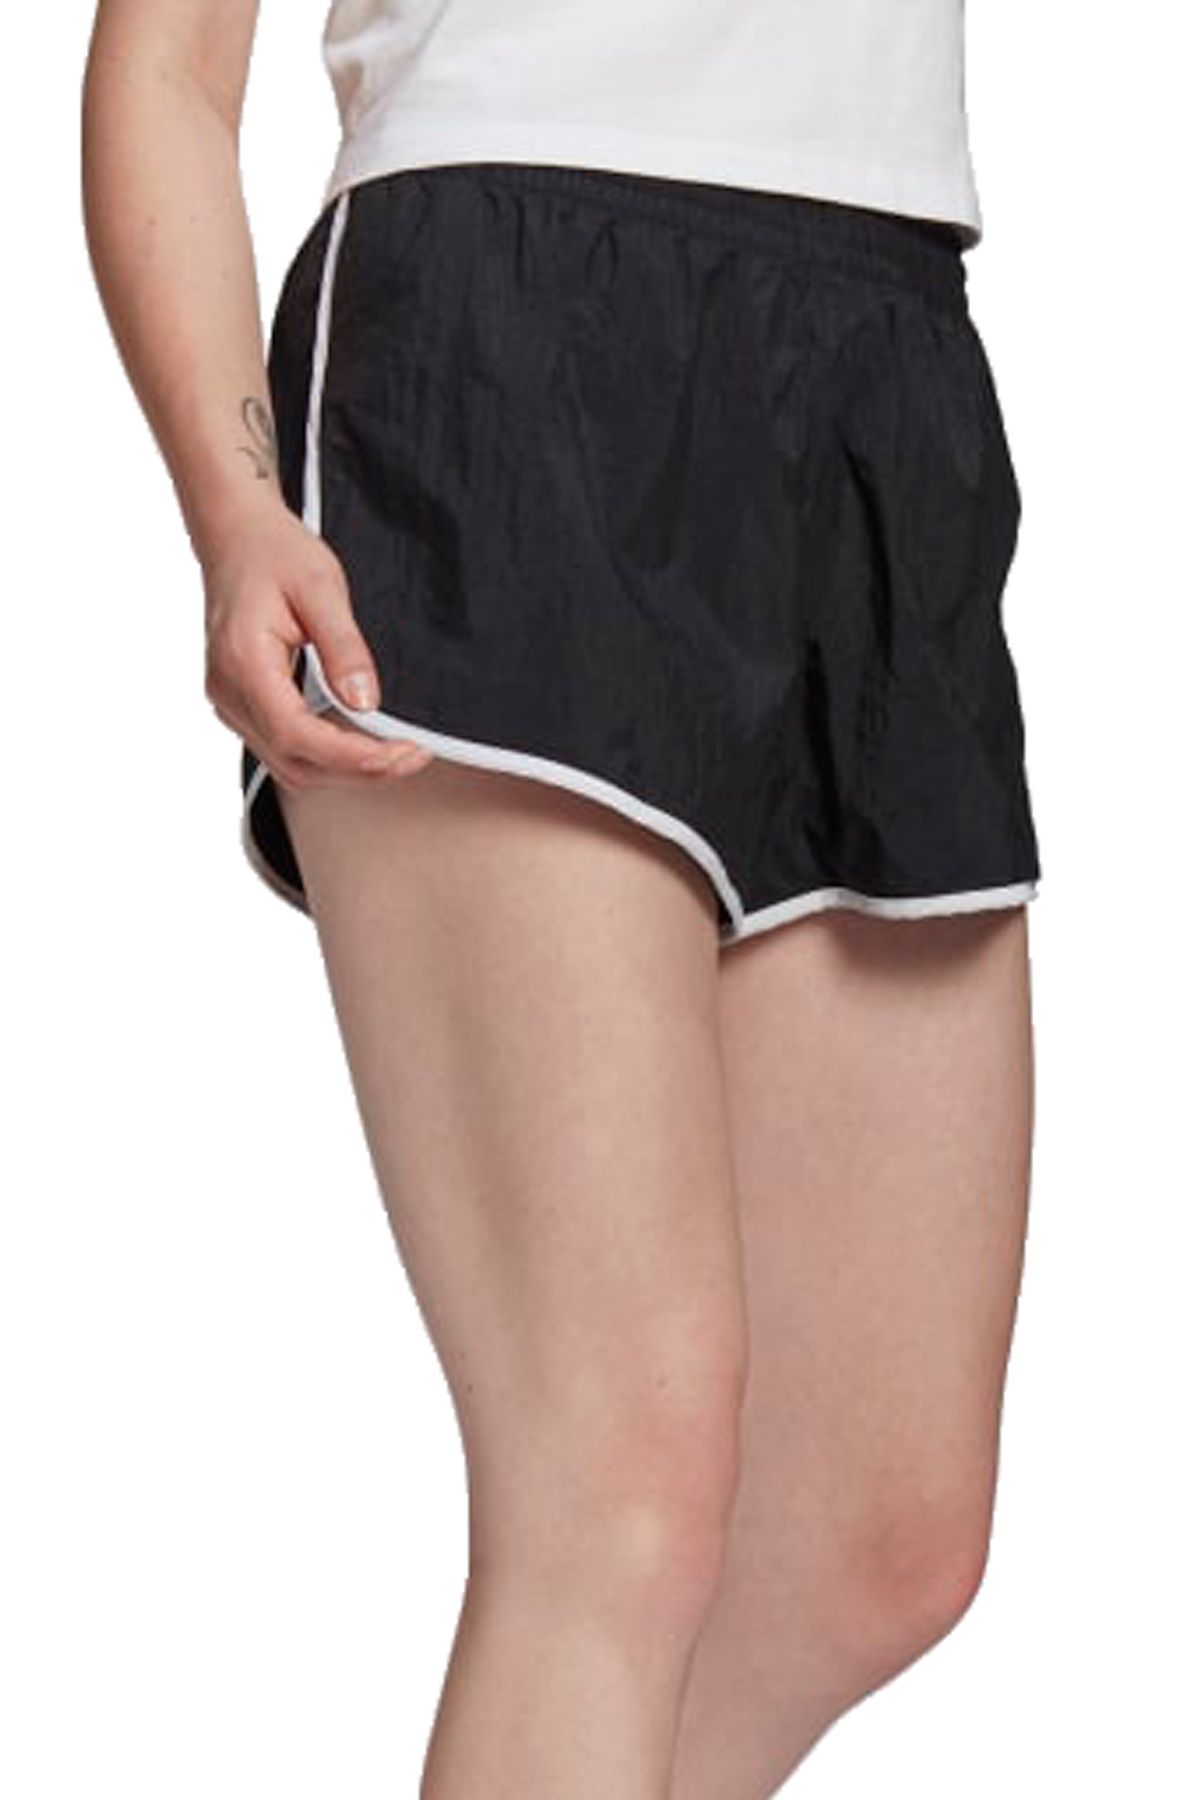 NEW Adidas Originals Women's 3-Stripe Shorts Athletic, Size Small, Black  GN2885